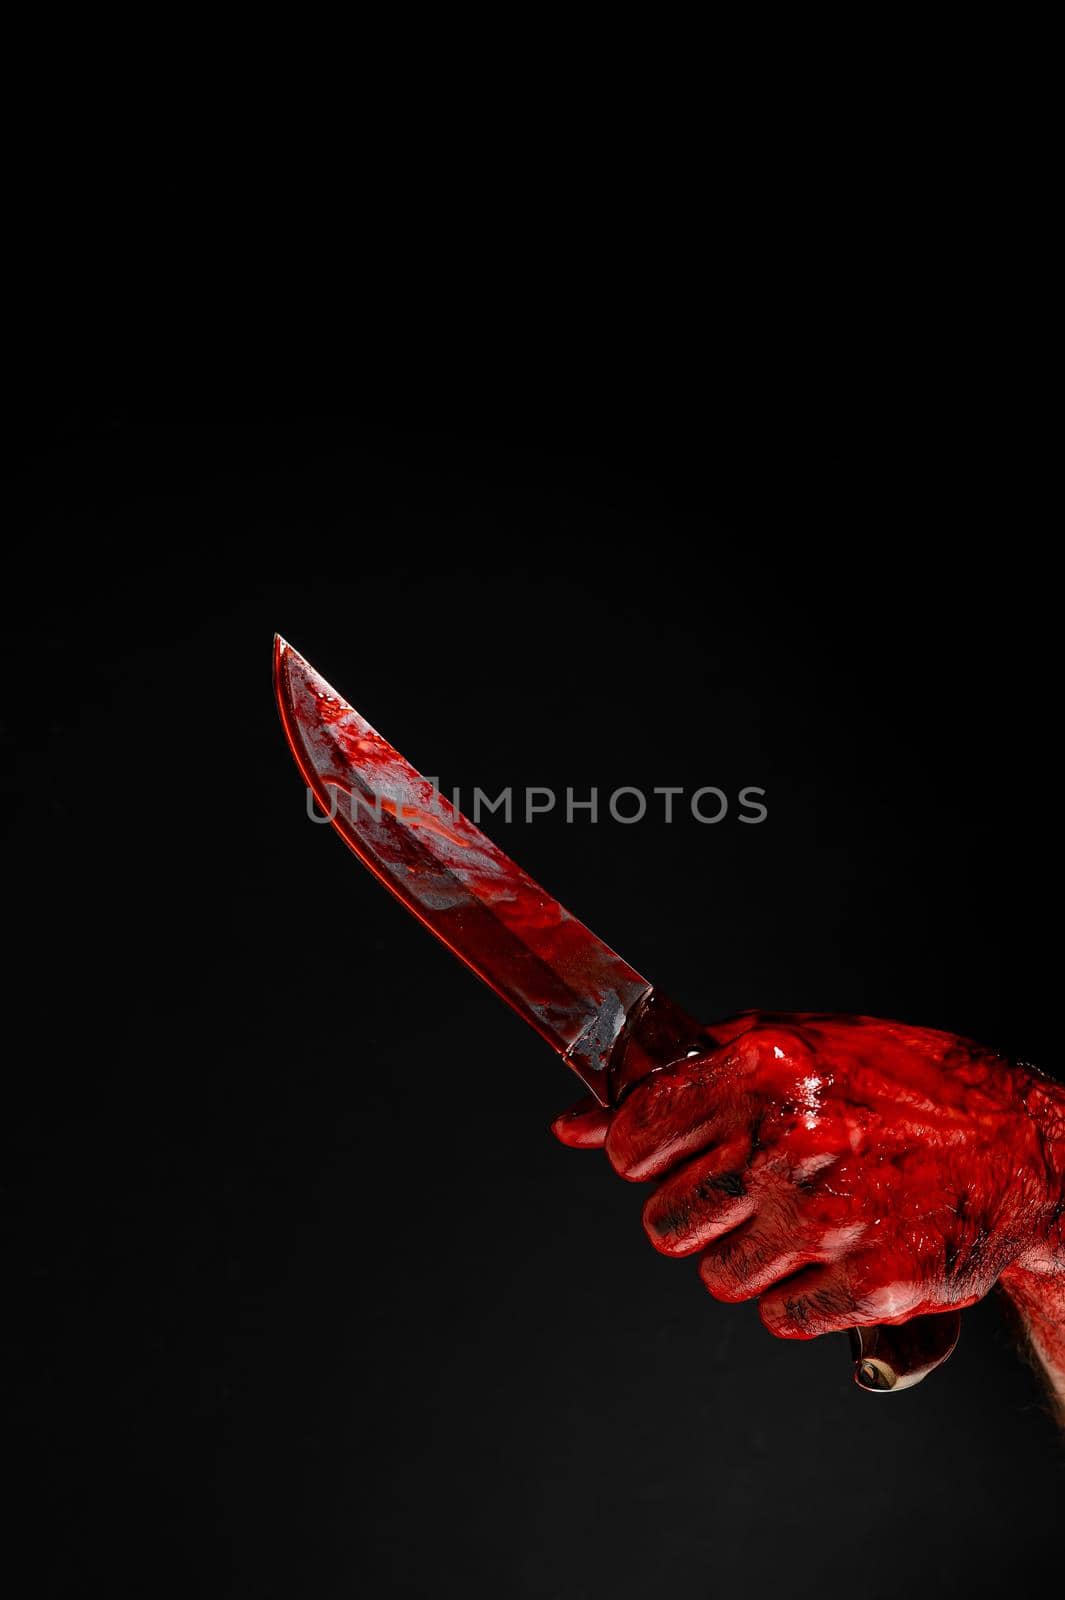 A man with bloody hands brandishes a knife on a black background